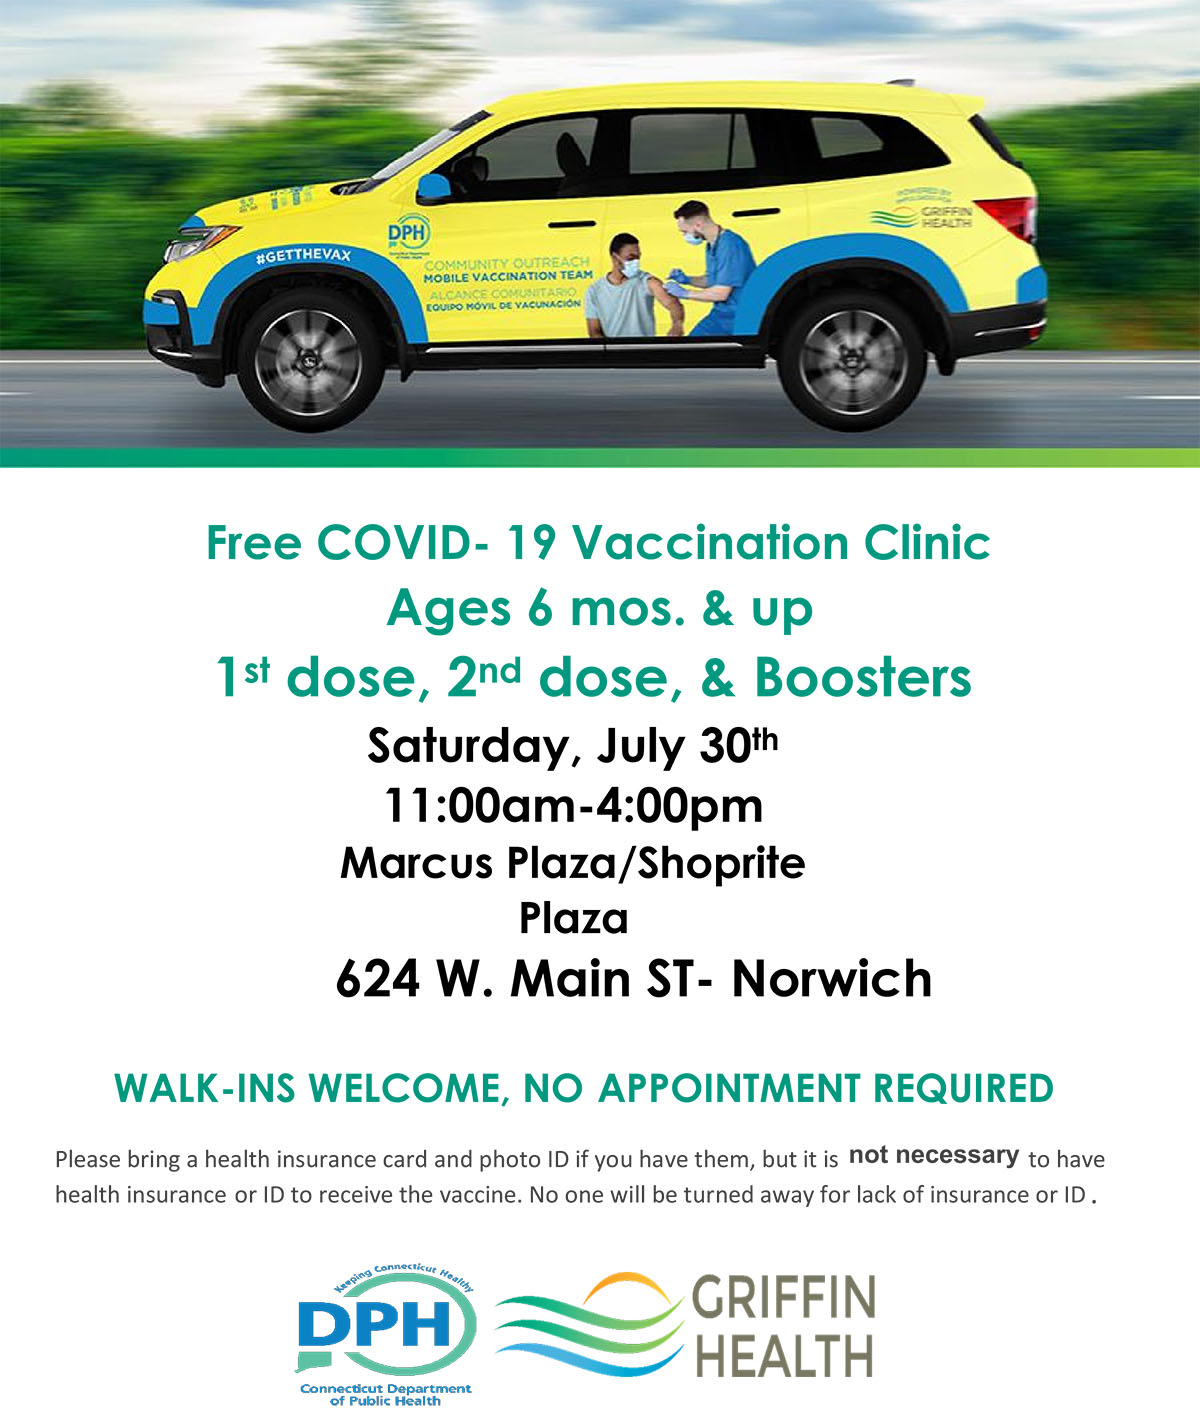 Free COVID- 19 Vaccination Clinic Ages 6 mos. & up